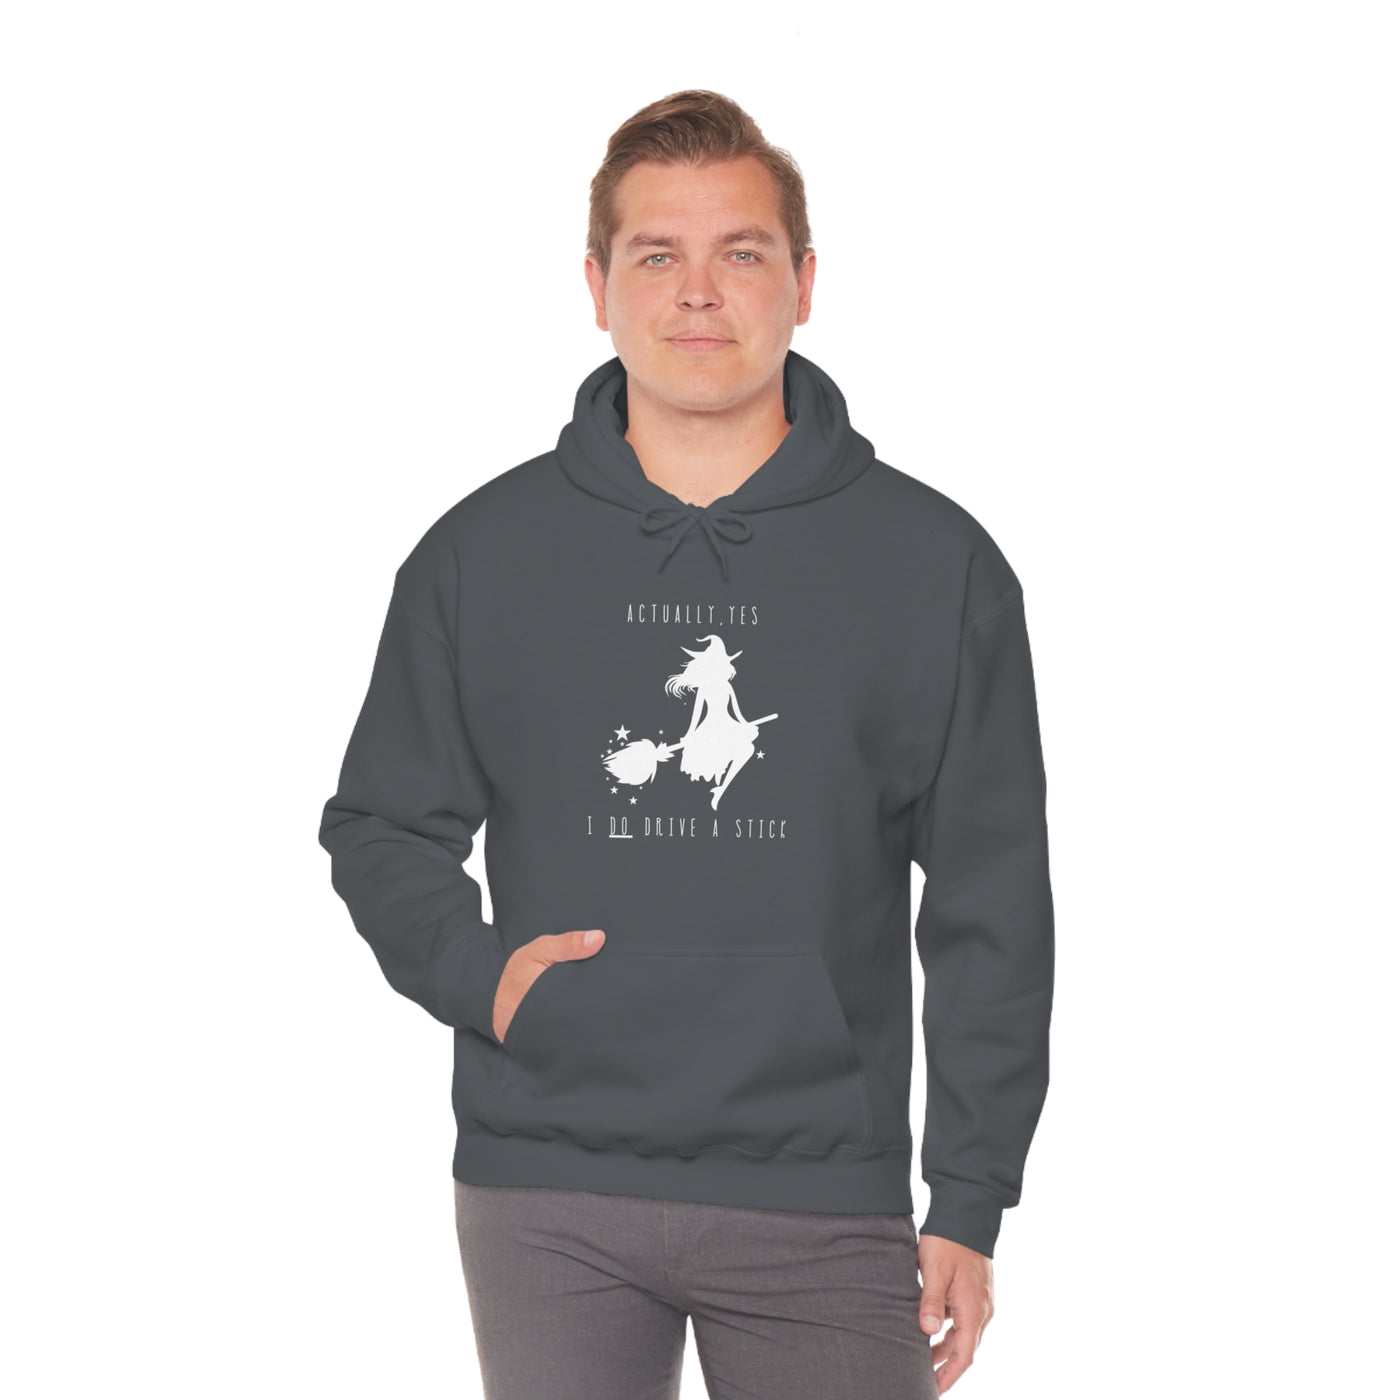 Actually, Yes I Do Drive a Stick Unisex Hoodie